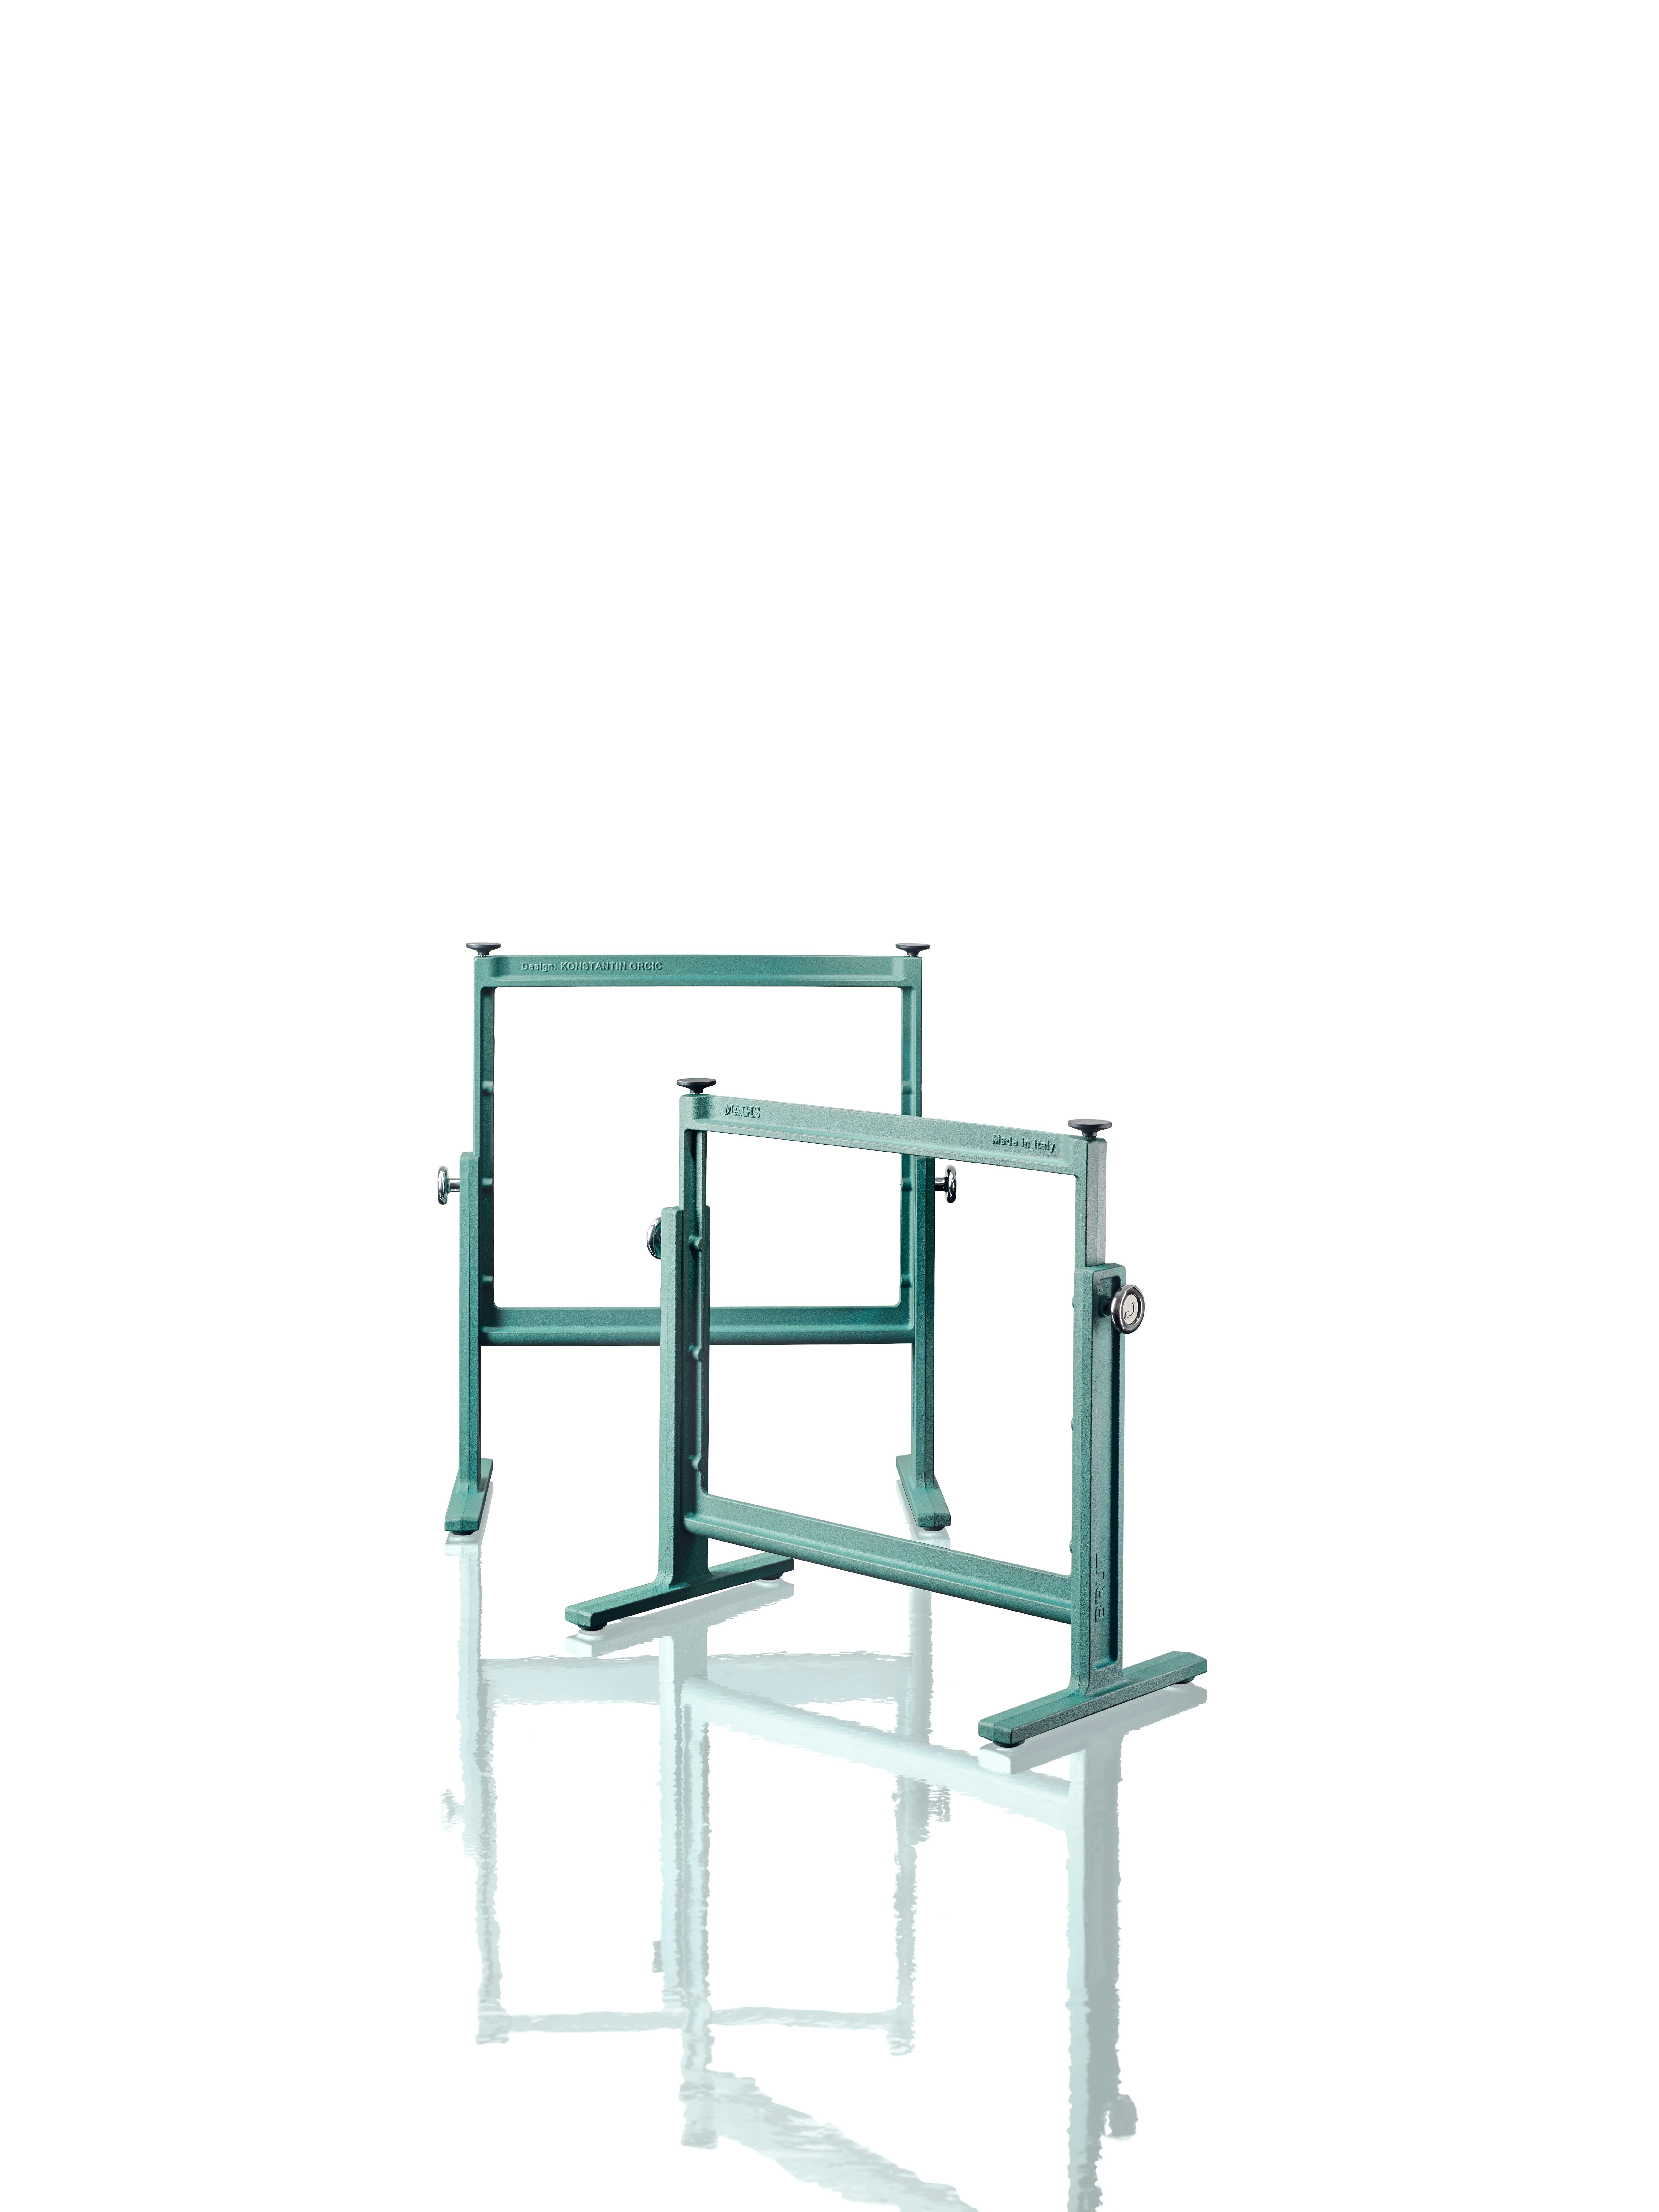 Brut Table by Konstantin Grcic for MAGIS For Sale 10